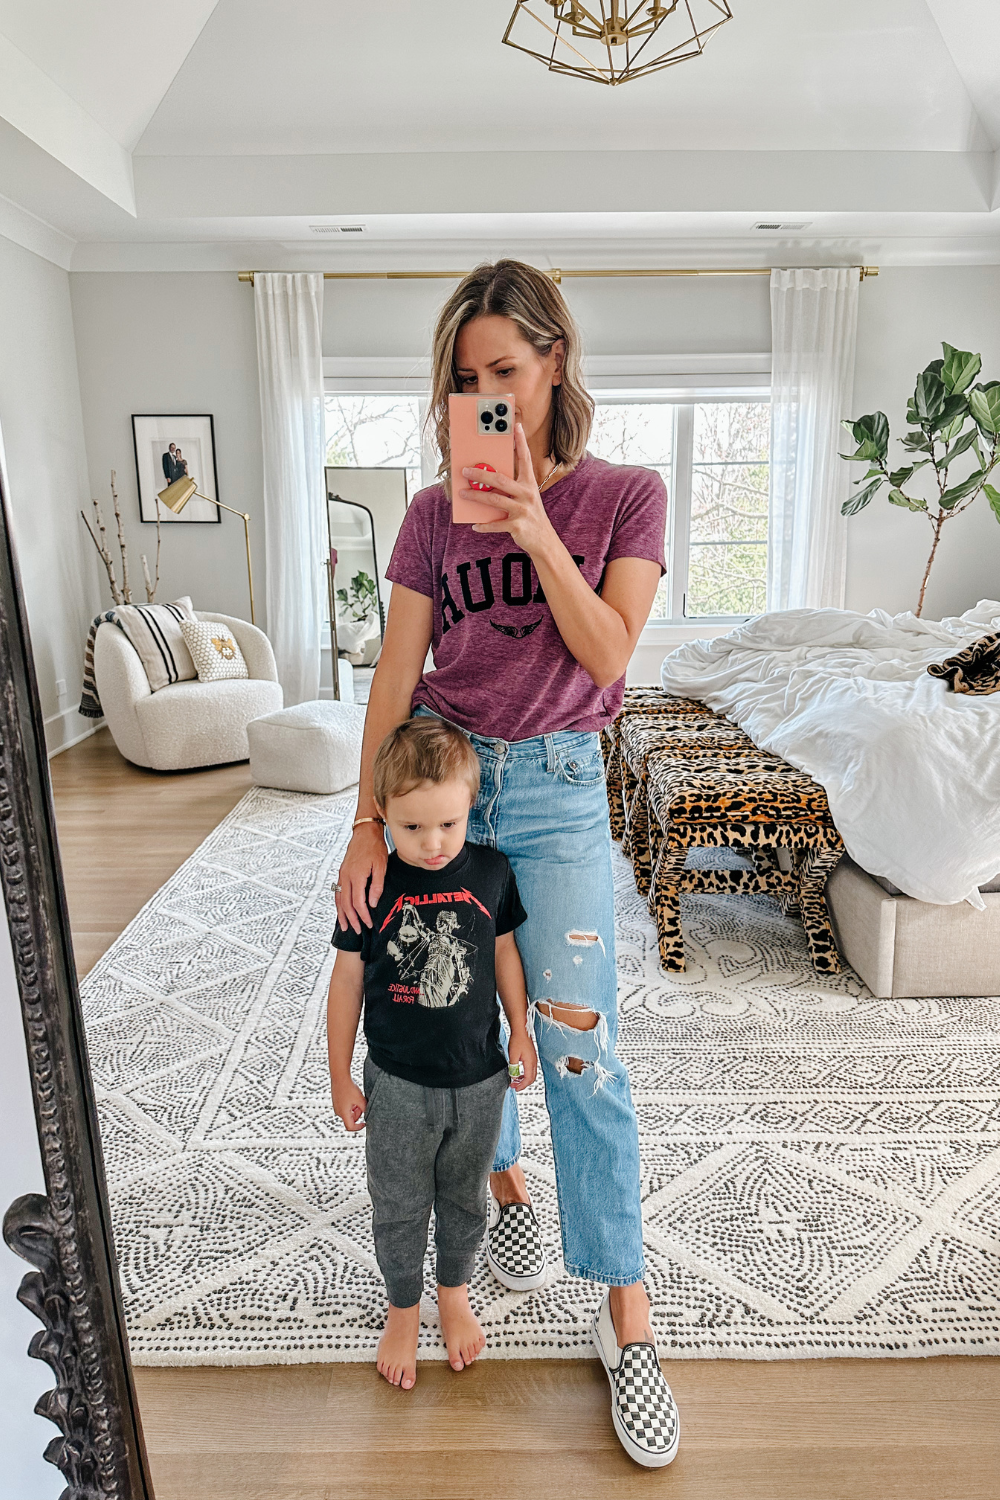 Suzanne and her son, she's wearing a graphic t-shirt and denim jeans